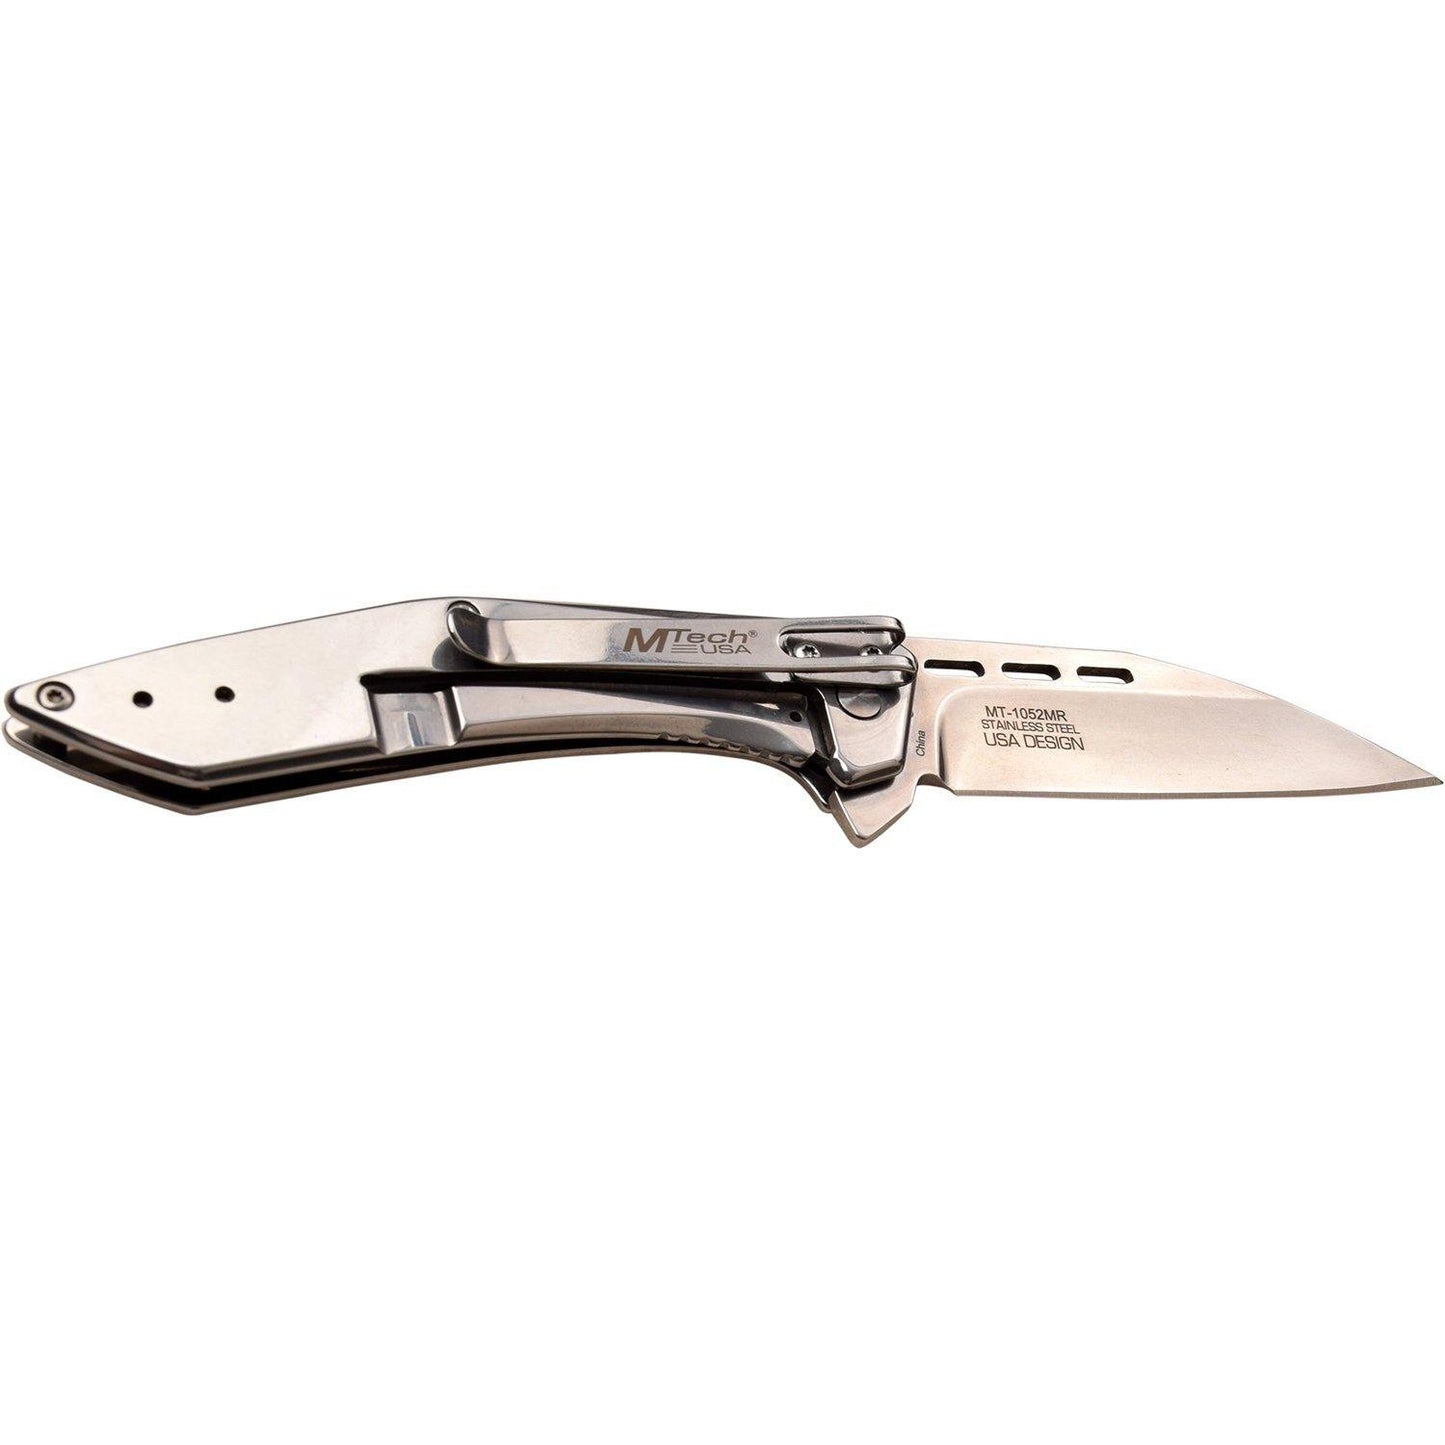 Mtech Wharncliffe Fine Edge Blade Folding Knife - 7.75 Inches Overall #mt-1052Mr - Xhunter New Zealand